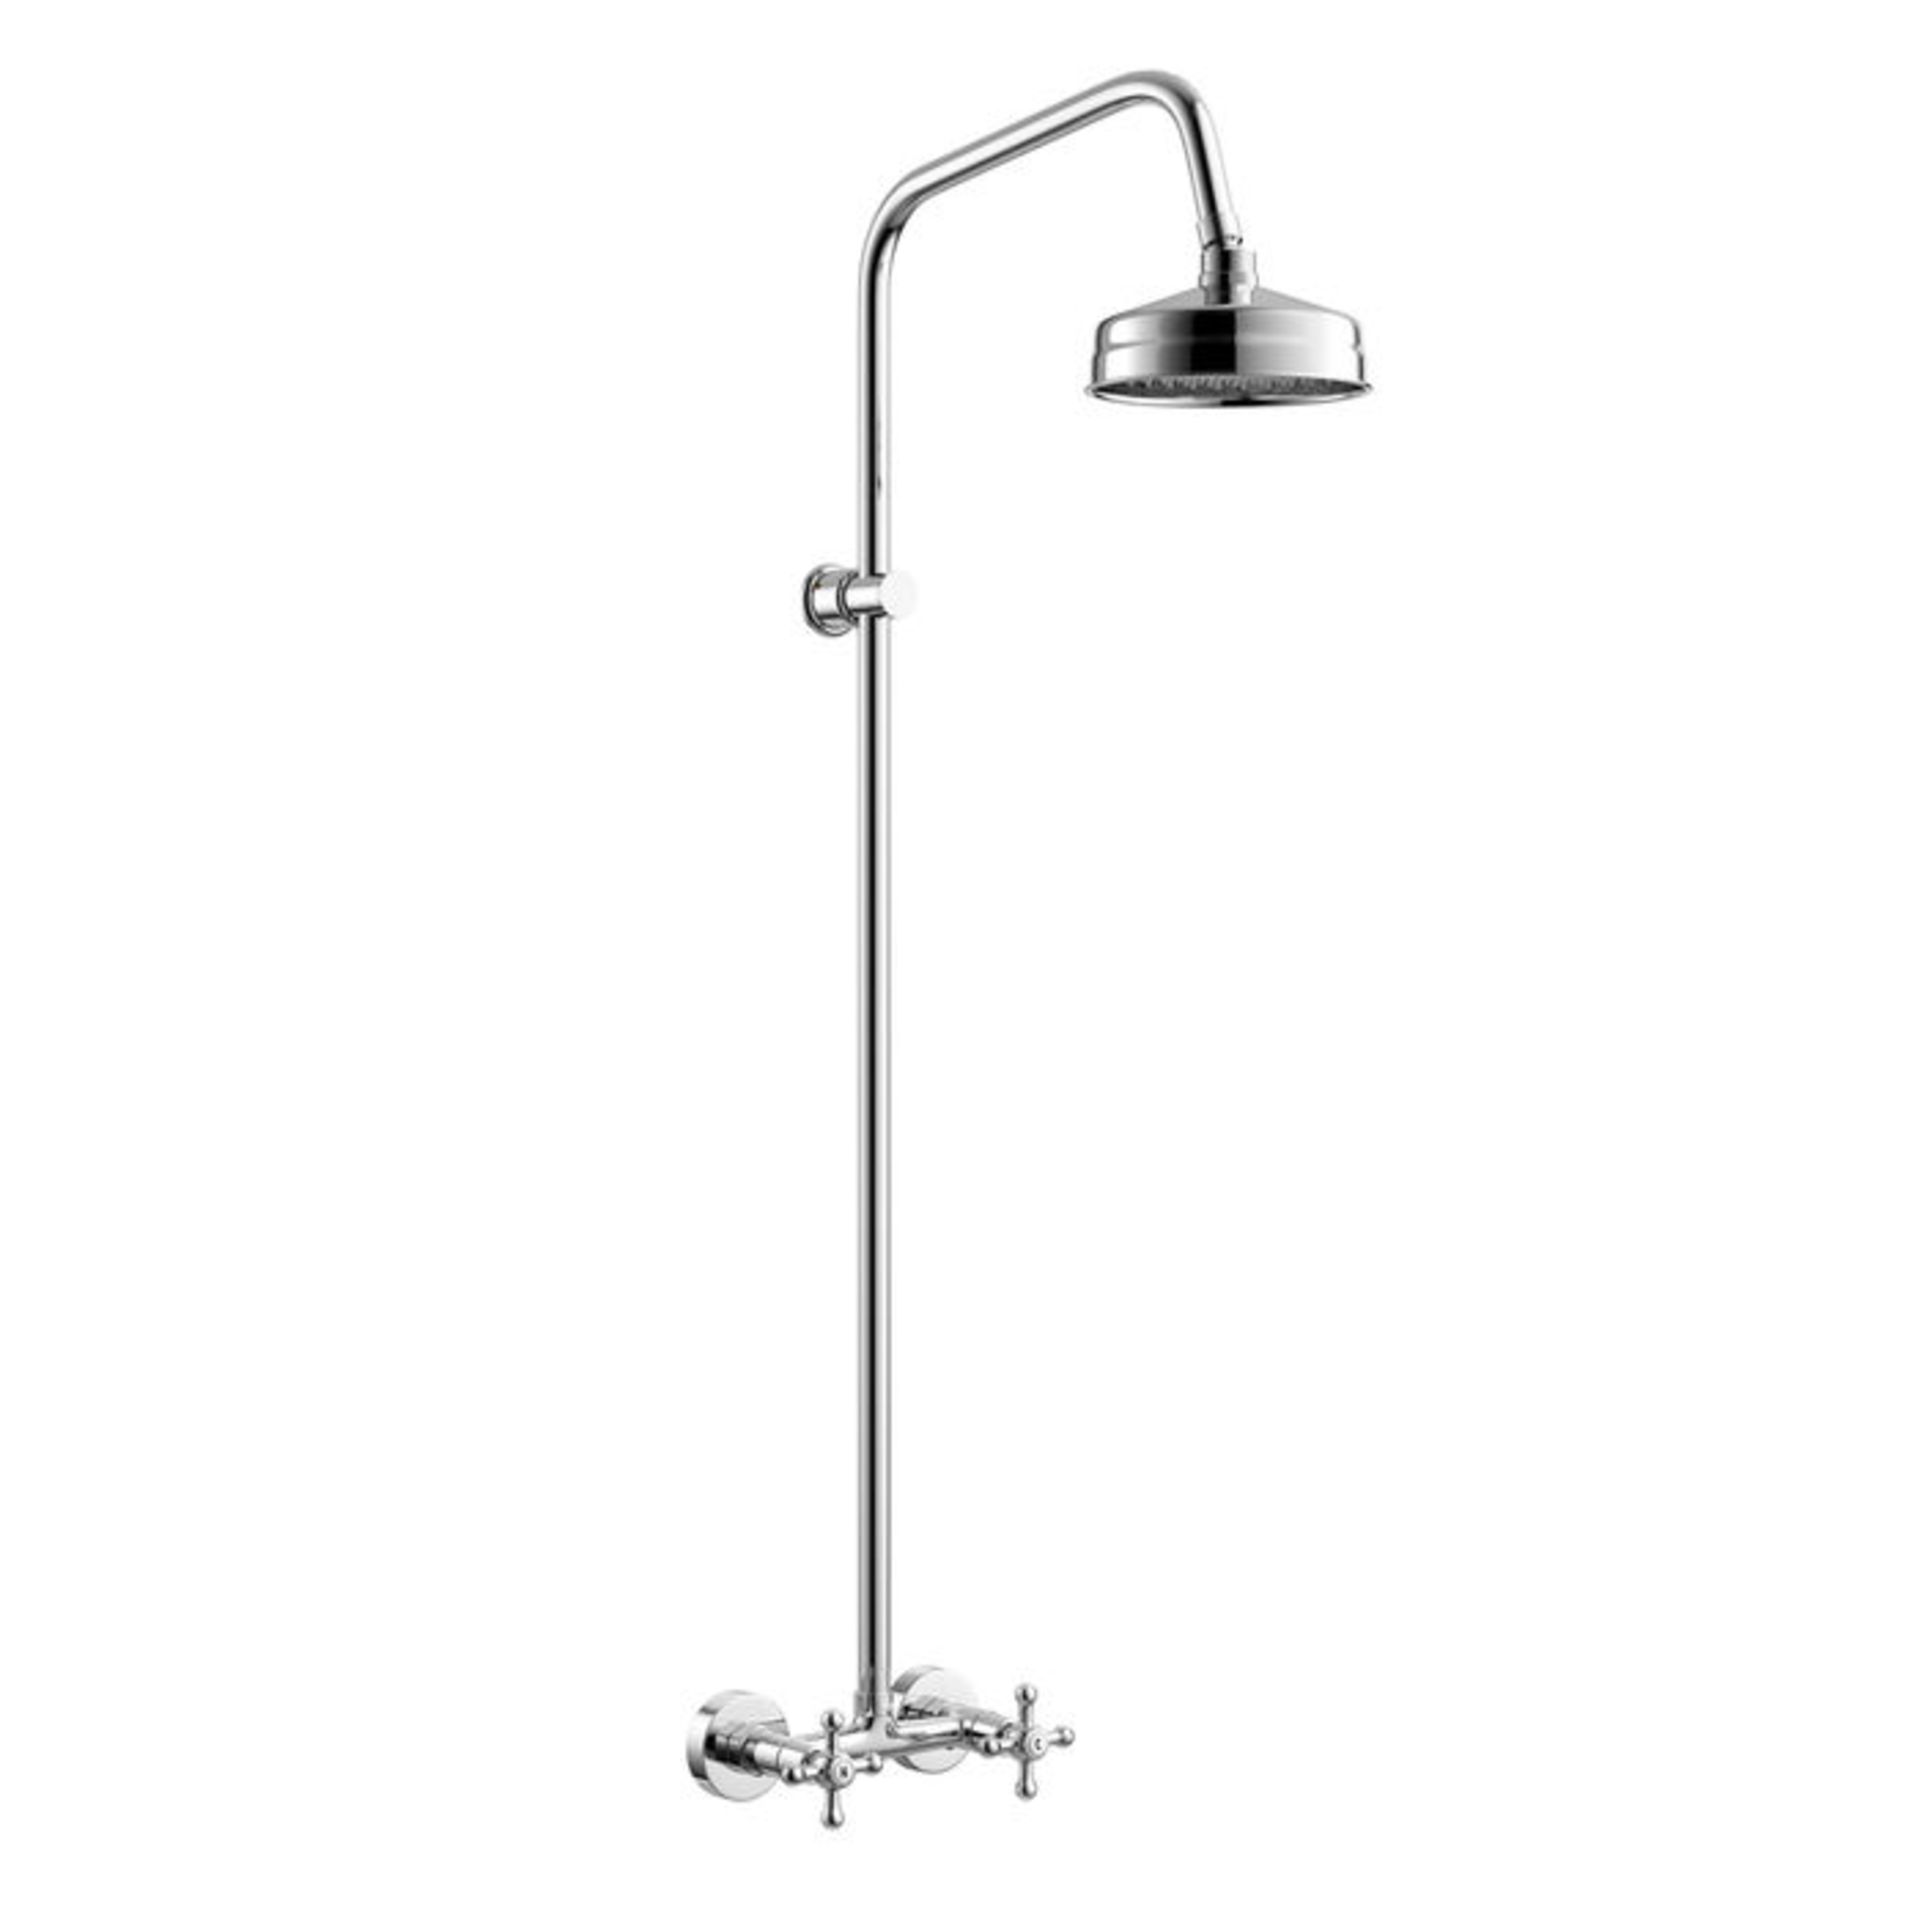 (P90) Traditional Exposed Shower Medium Head Exposed design makes for a statement piece Stunning - Image 2 of 3